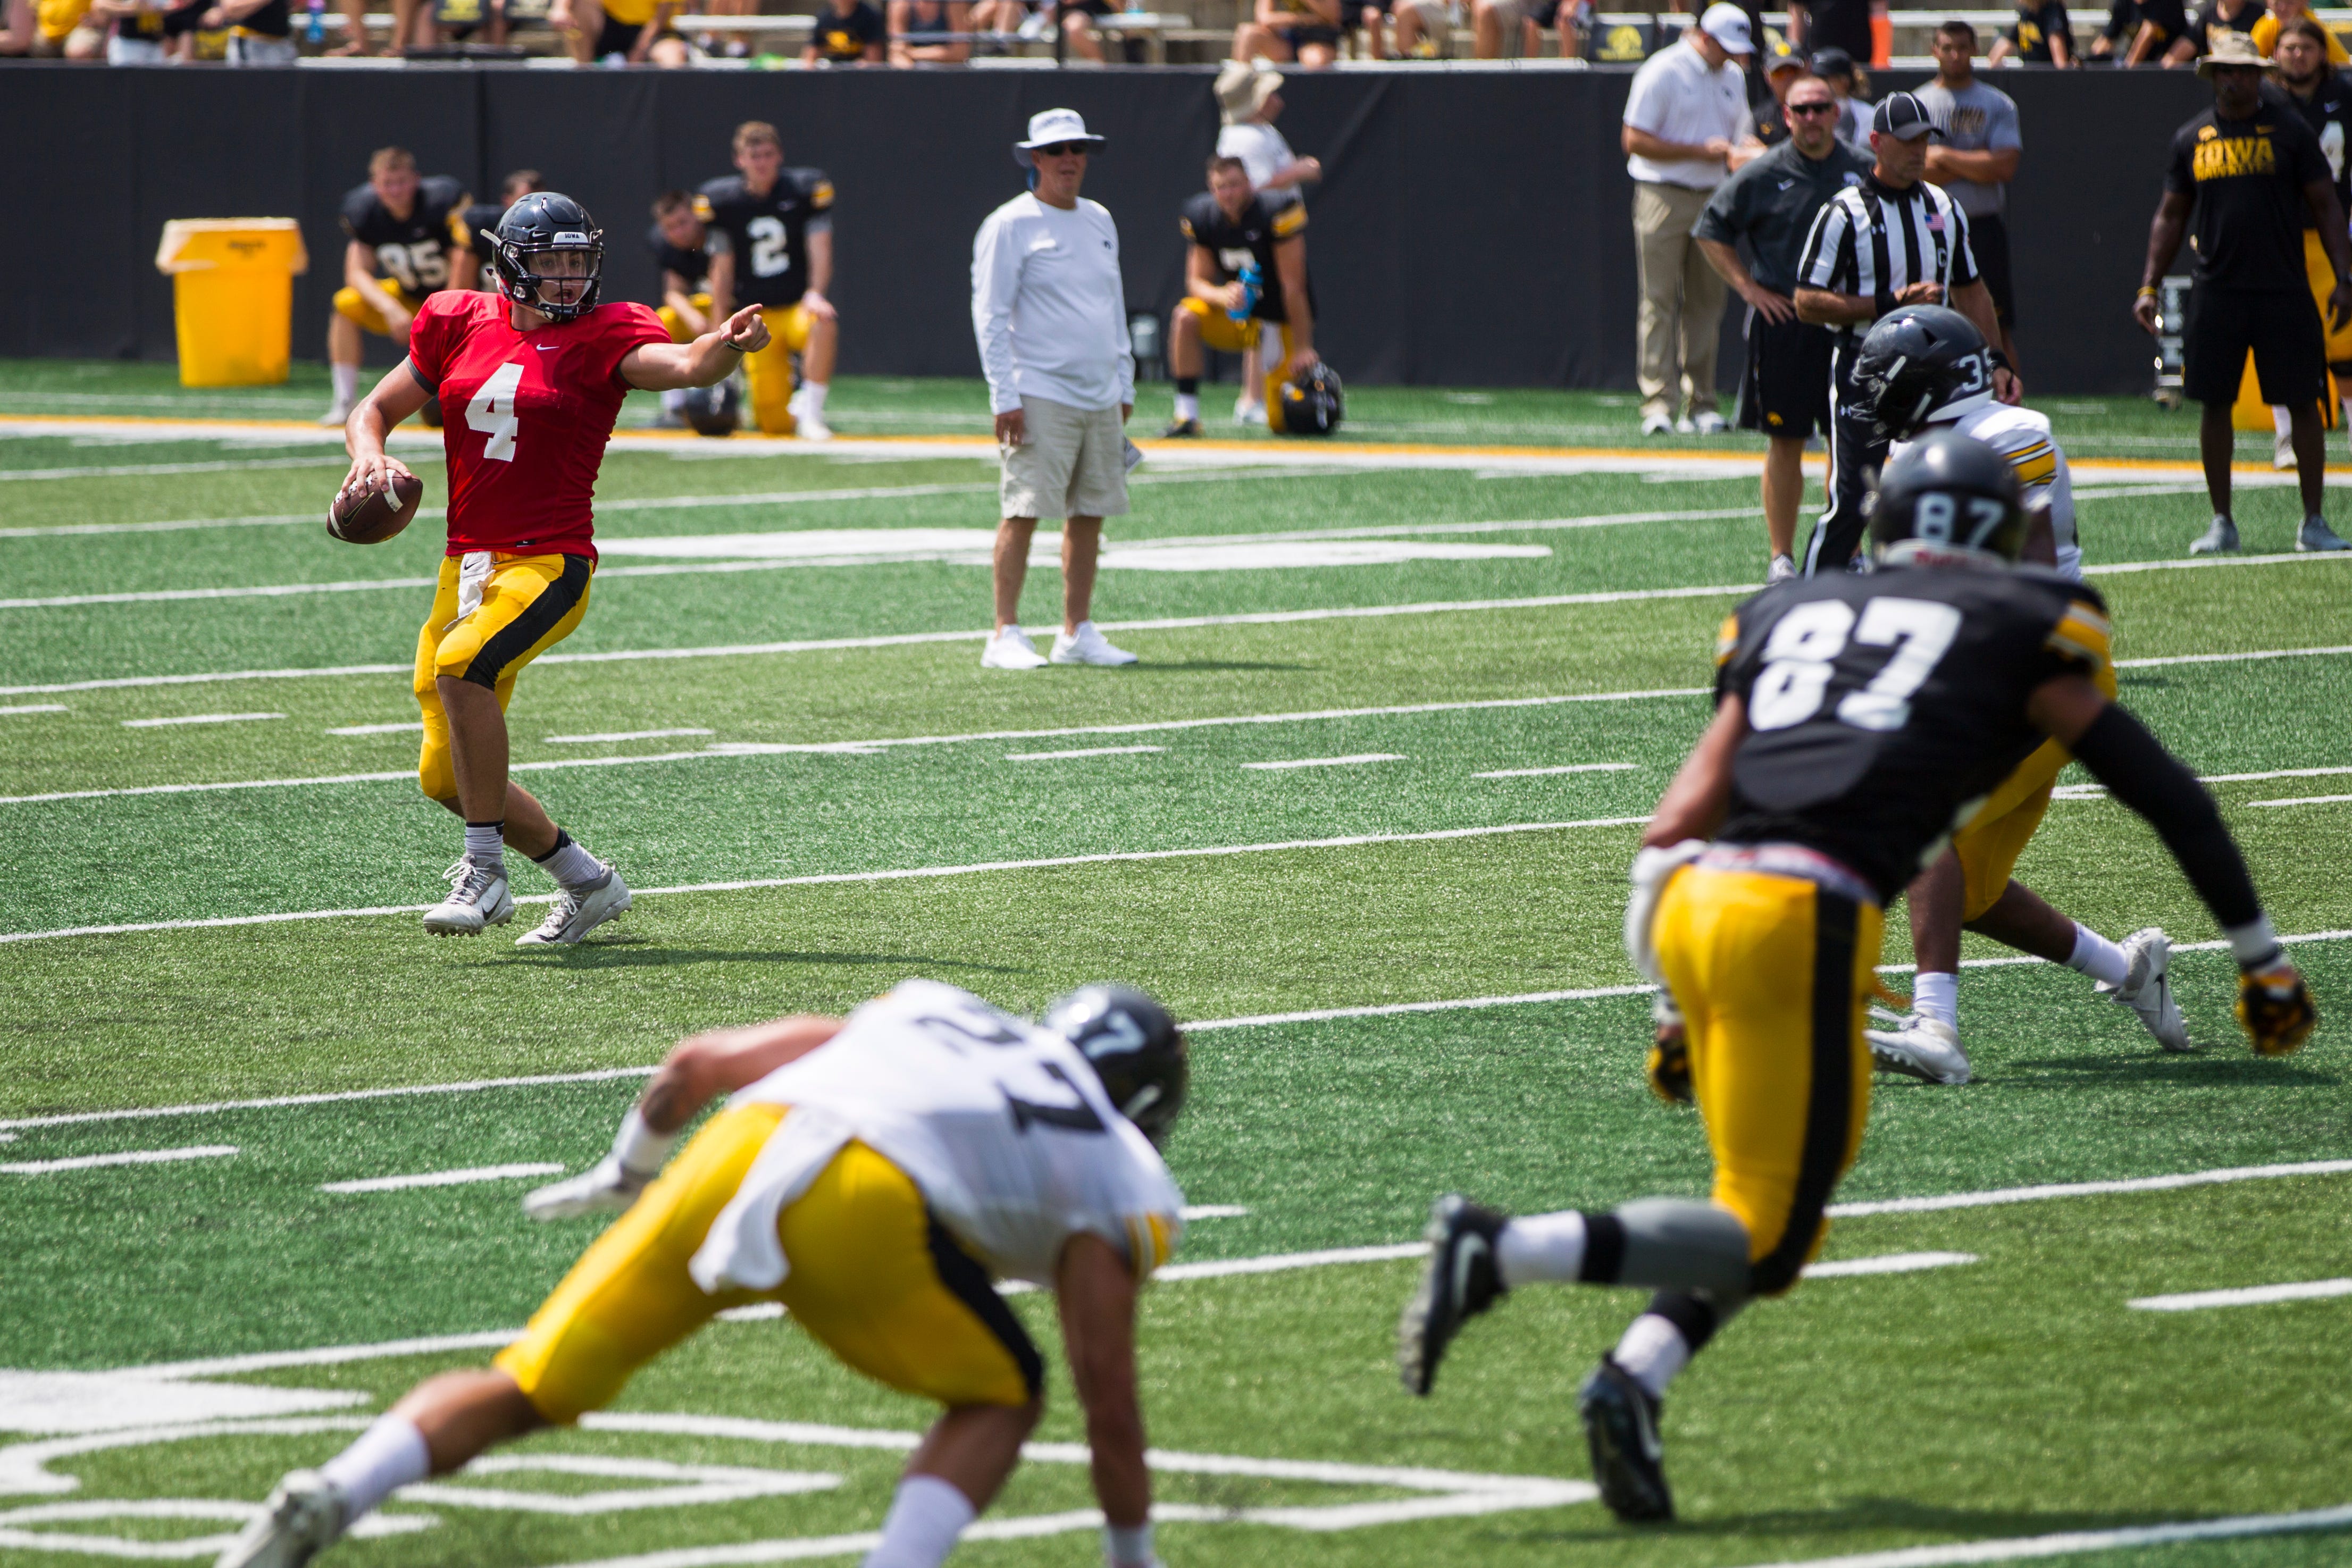 Iowa quarterback Nate Stanley gestures to tight end Noah Fant (87) during a Kids Day practice on Saturday, Aug. 11, 2018, at Kinnick Stadium in Iowa City.